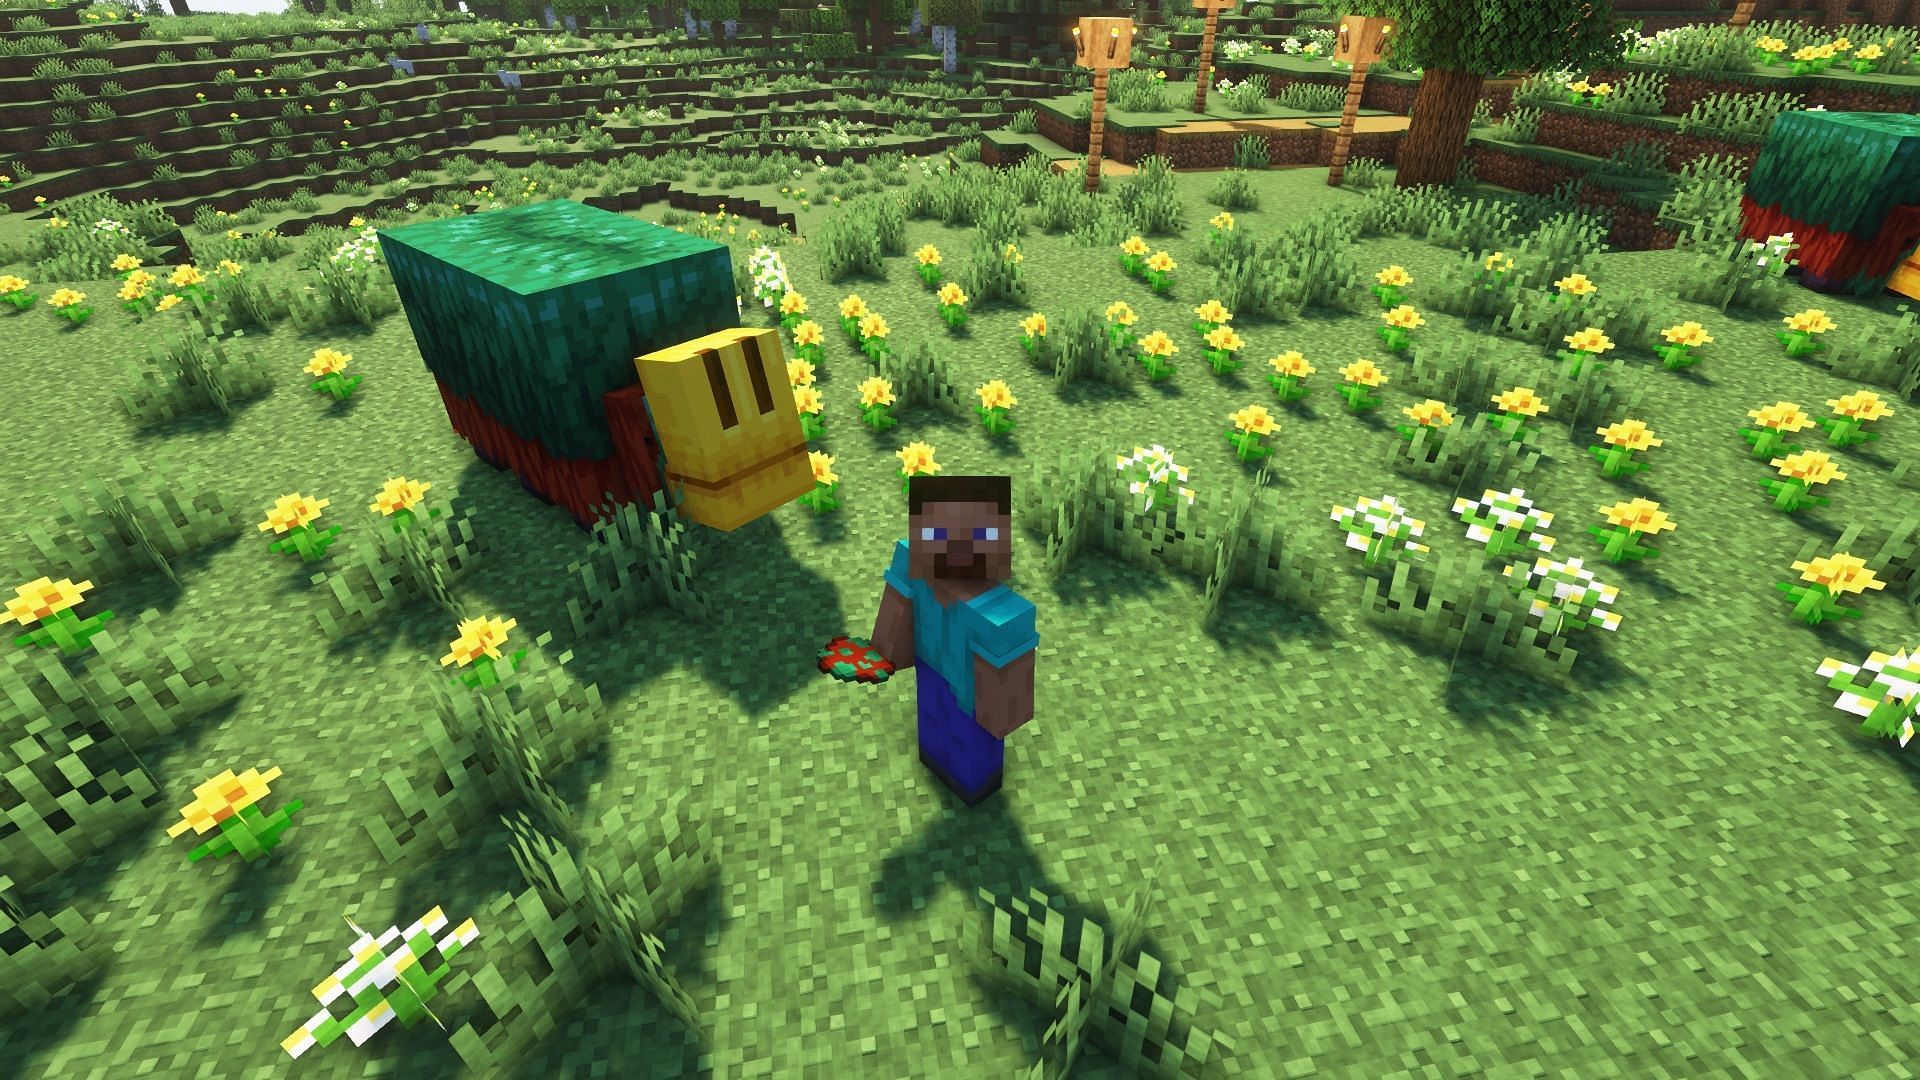 Sniffer spawn eggs can be obtained in creative mode (Image via Mojang)